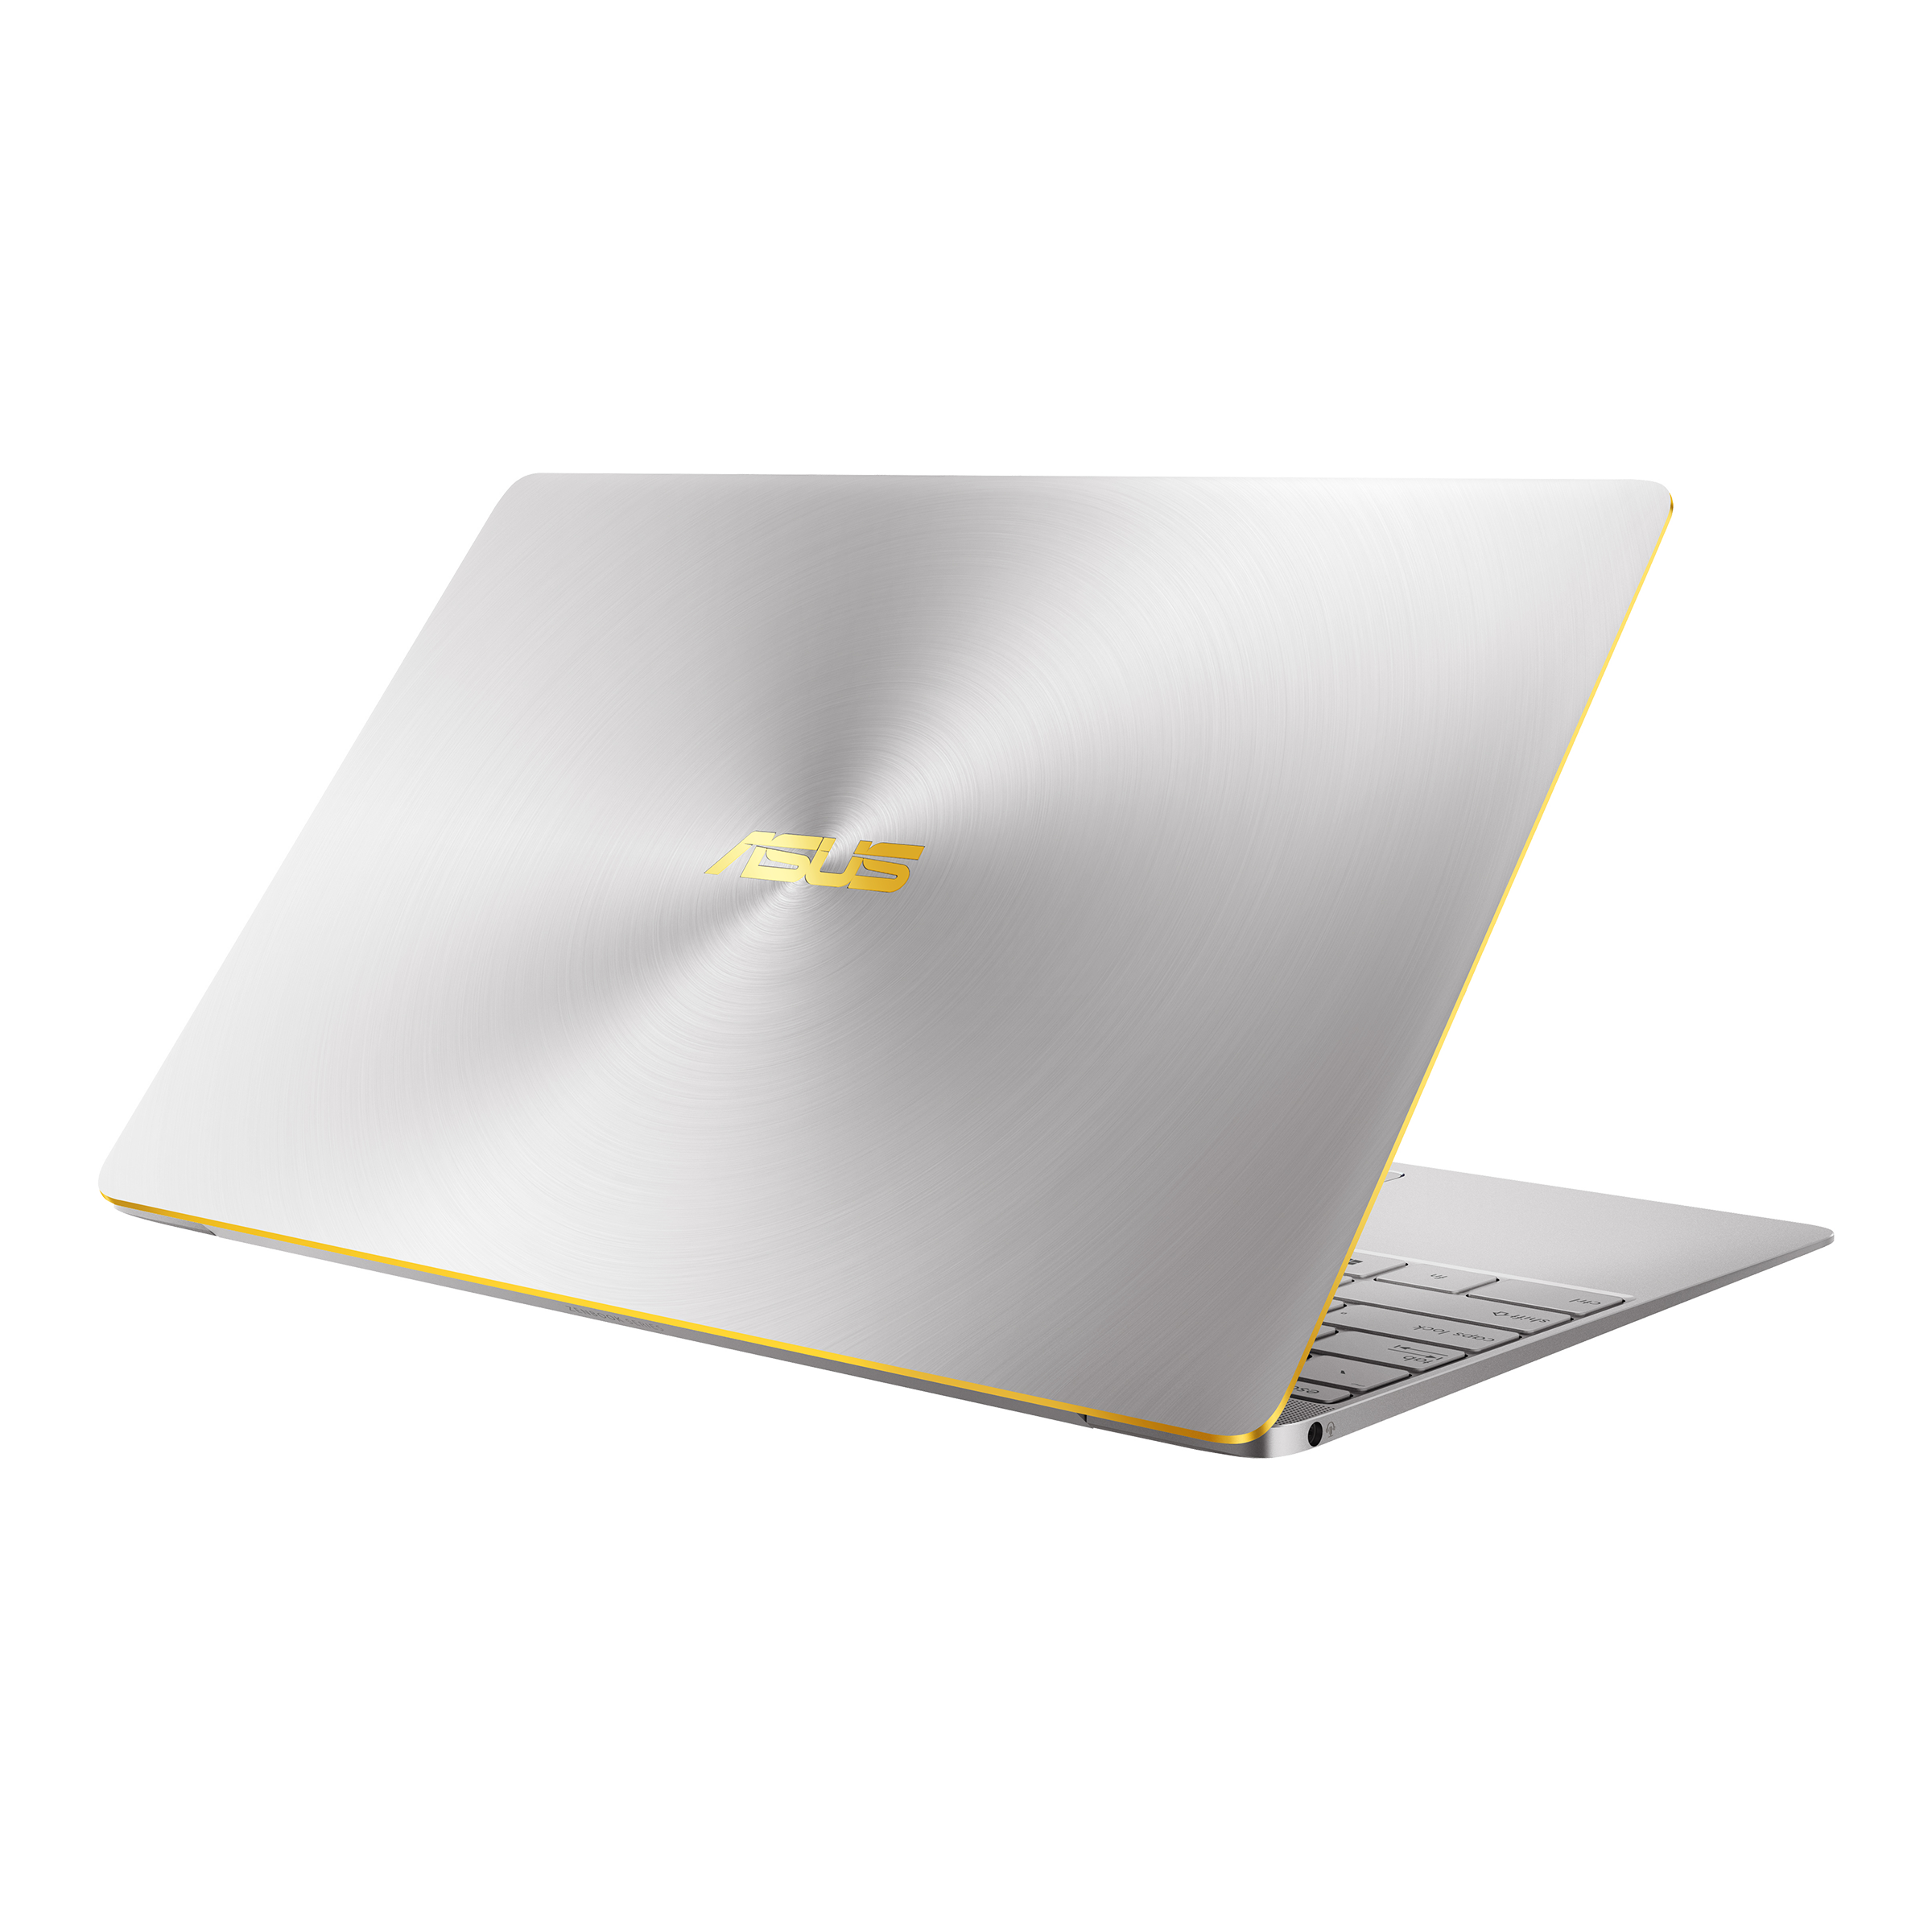 Asus Zenbook 3 Ux390 Laptops For Home Asus Malaysia